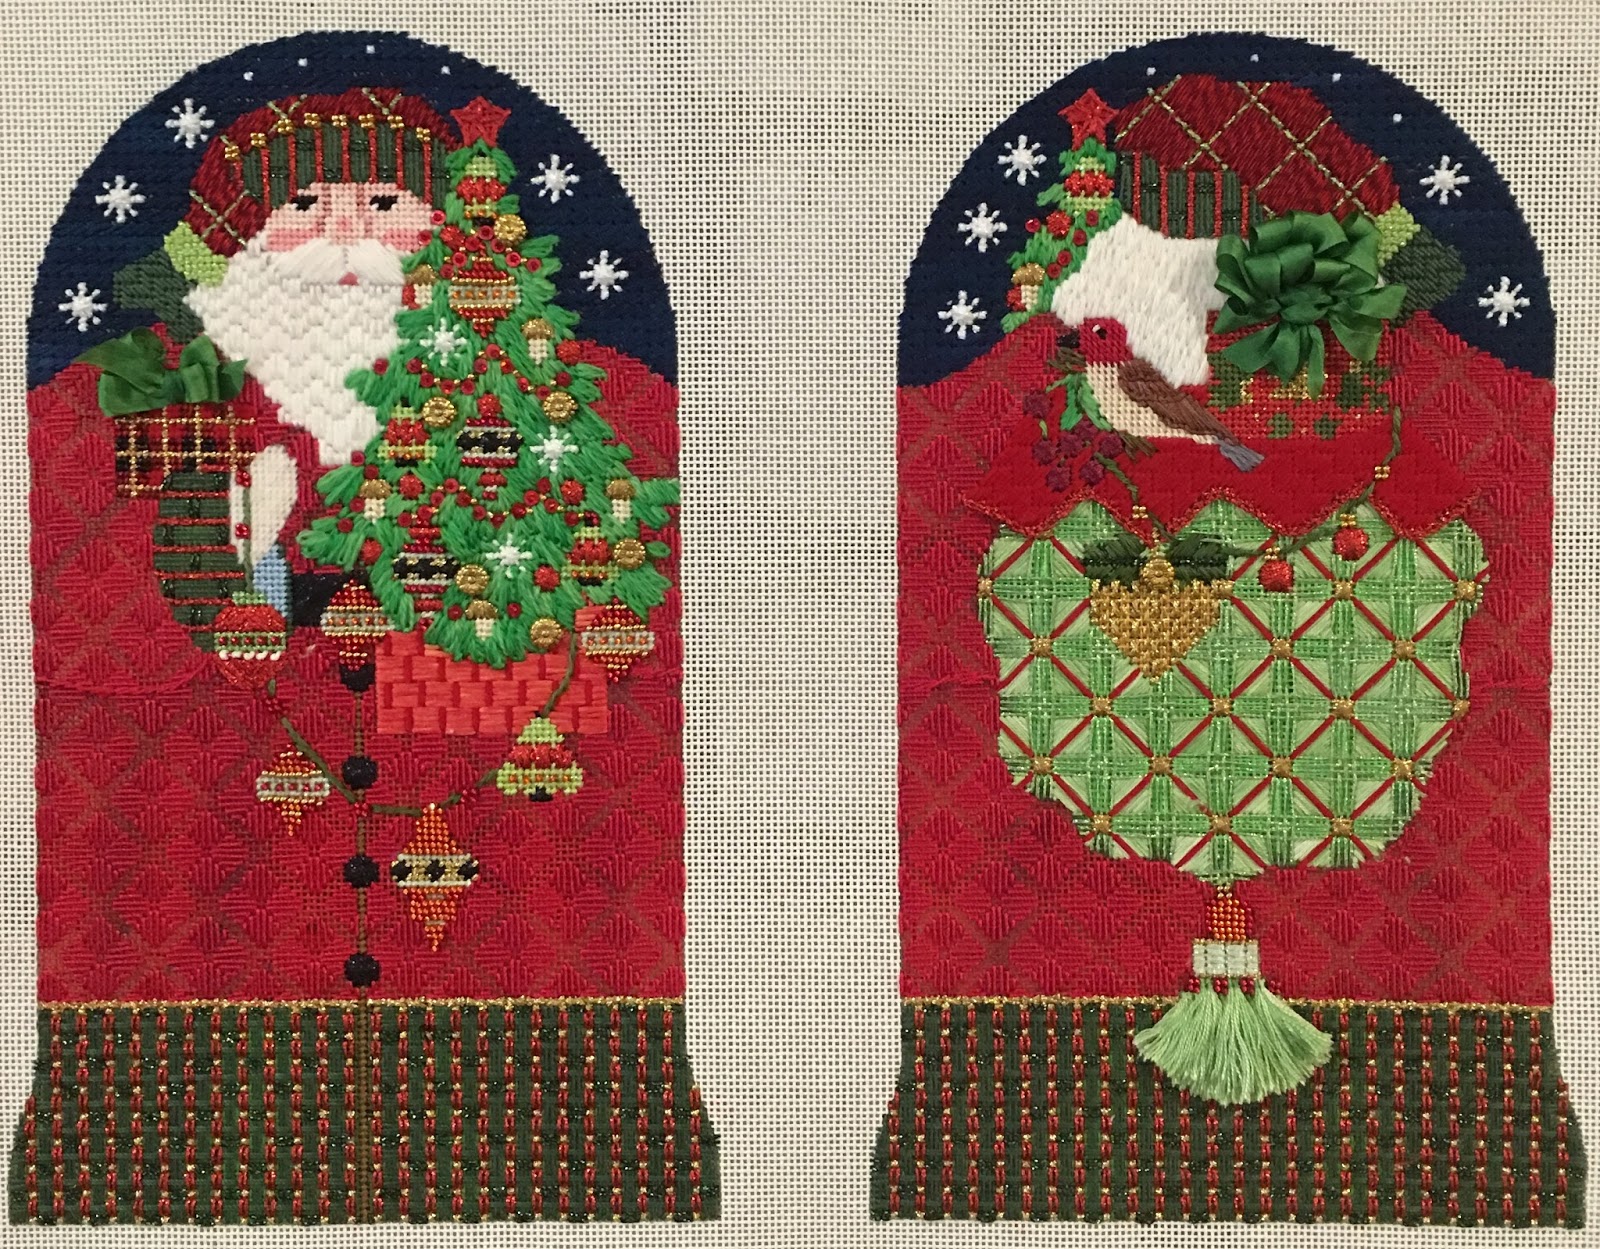 Needlepoint Social: Gallery of Stitched Pieces